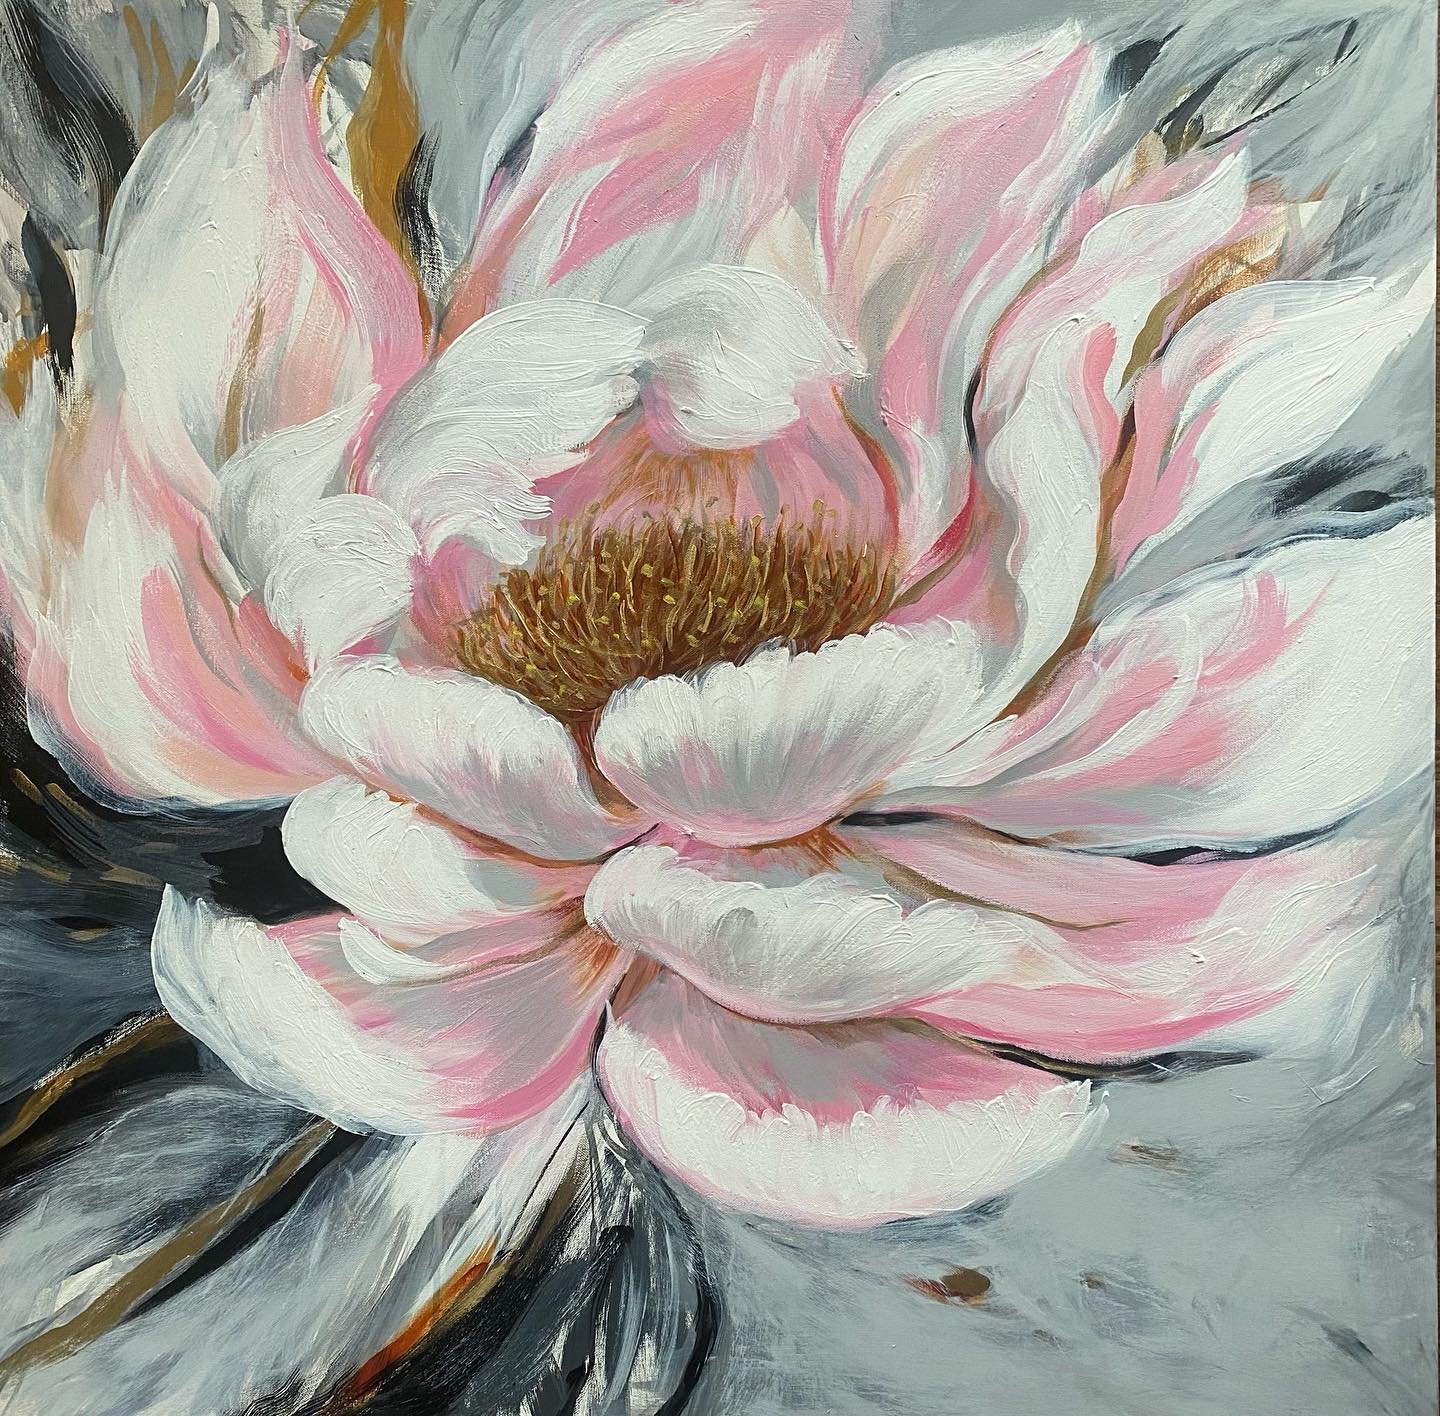 What is your favourite thing about peonies? Mine is thinking about my mom.

Blushing Princess Peony 2
36x36x1.5 inch 
Acrylic and acrylic gold on stretched canvas 
available 
.
.
.
.
#agneskokotfantasyflorals

#agneskokotpeonies